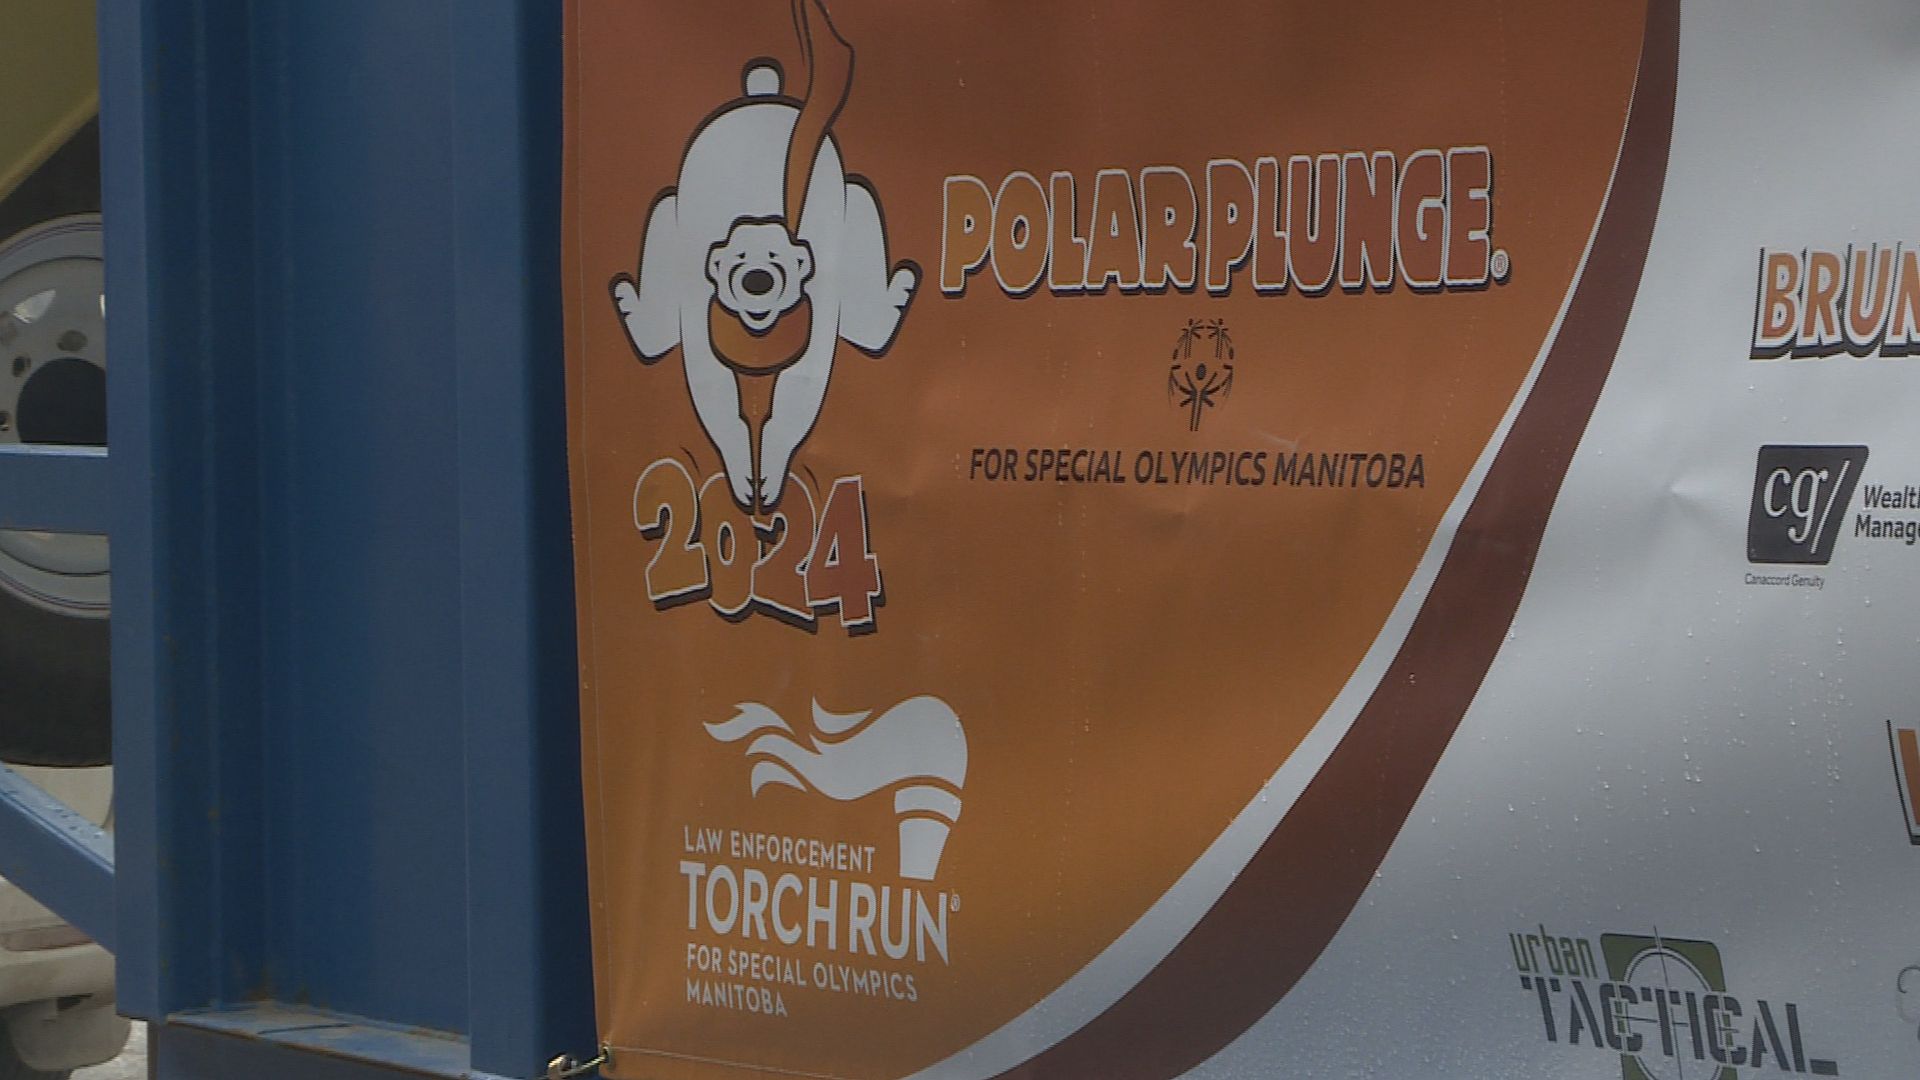 Around 60 people jumped into a pool of freezing water, in support of Special Olympics Manitoba.